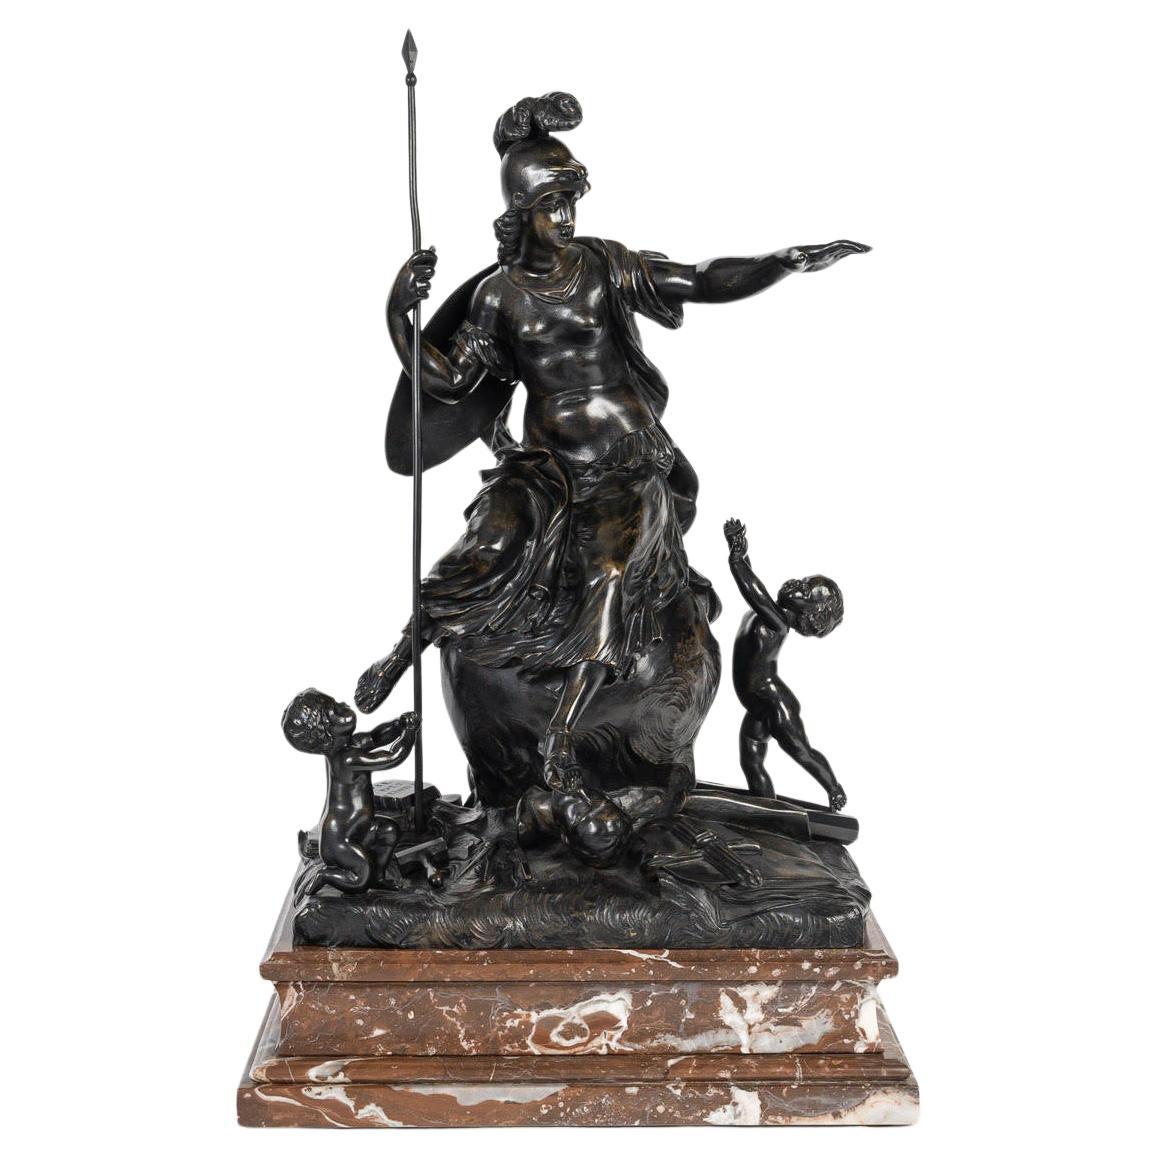 Bronze Sculpture of a Helmeted Woman Surrounded by Cherubs, Napoleon III Period. For Sale